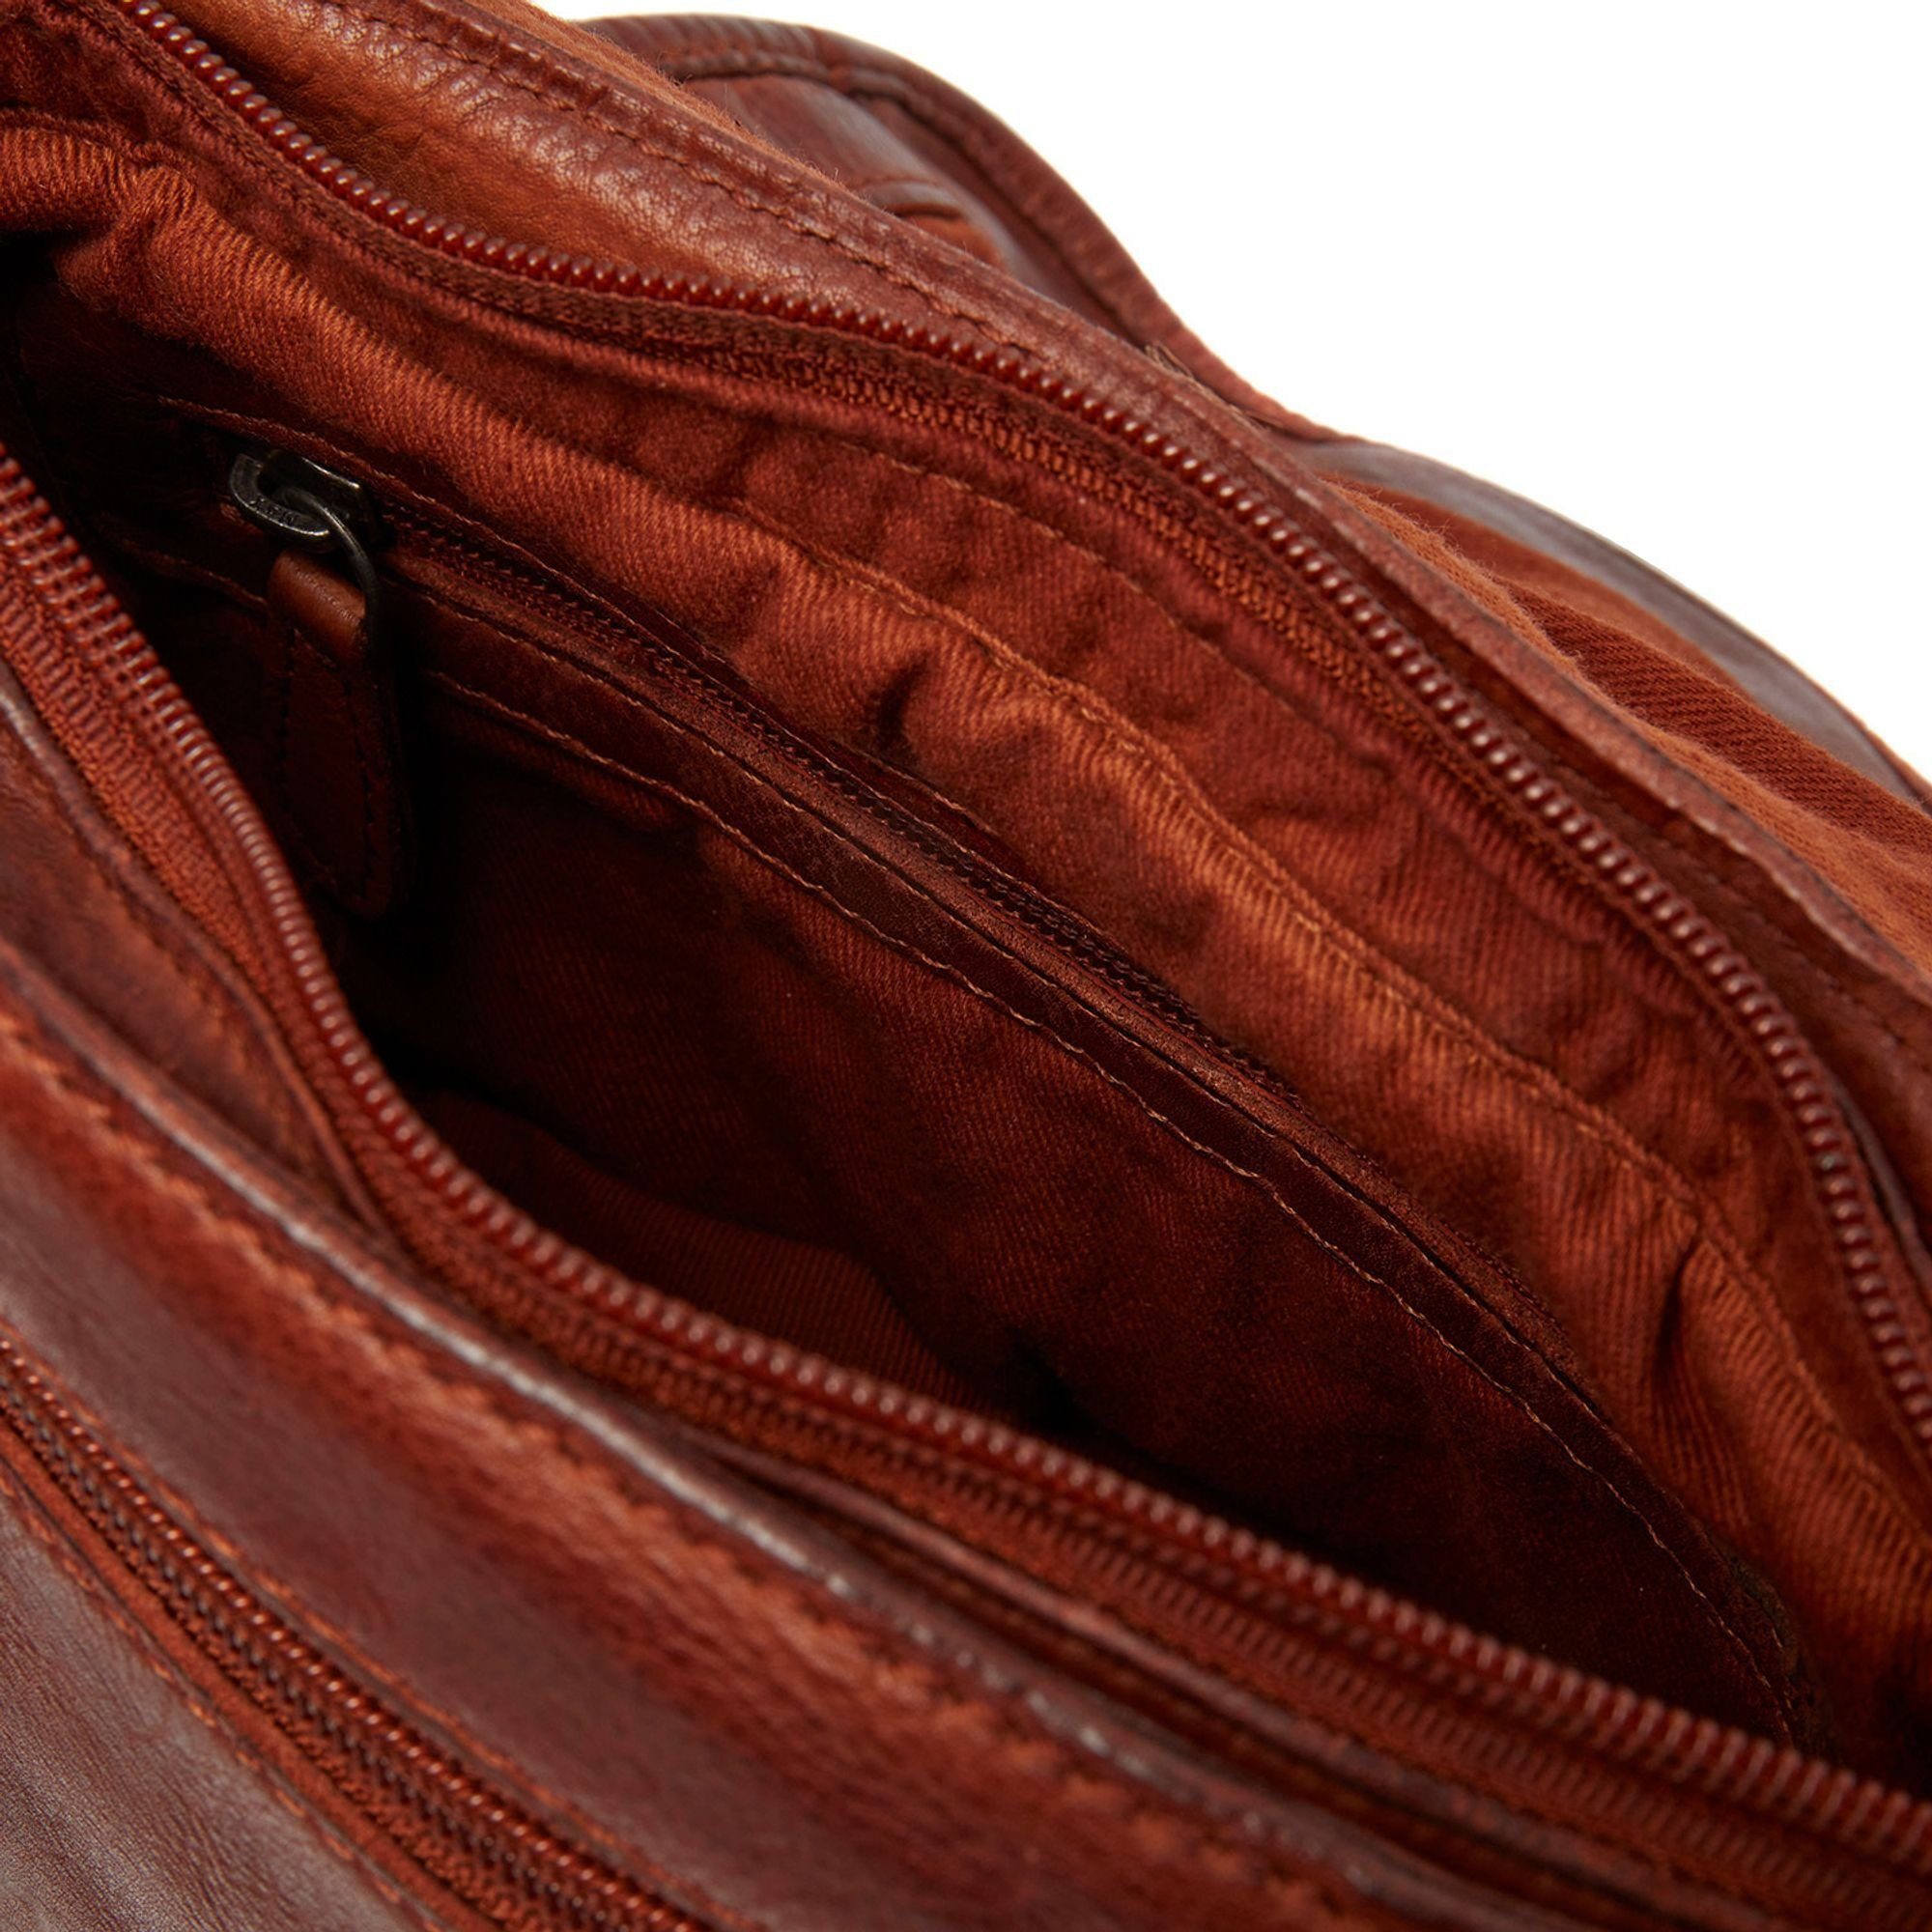 Schultertasche Washed, Brand cognac The Leder Chesterfield